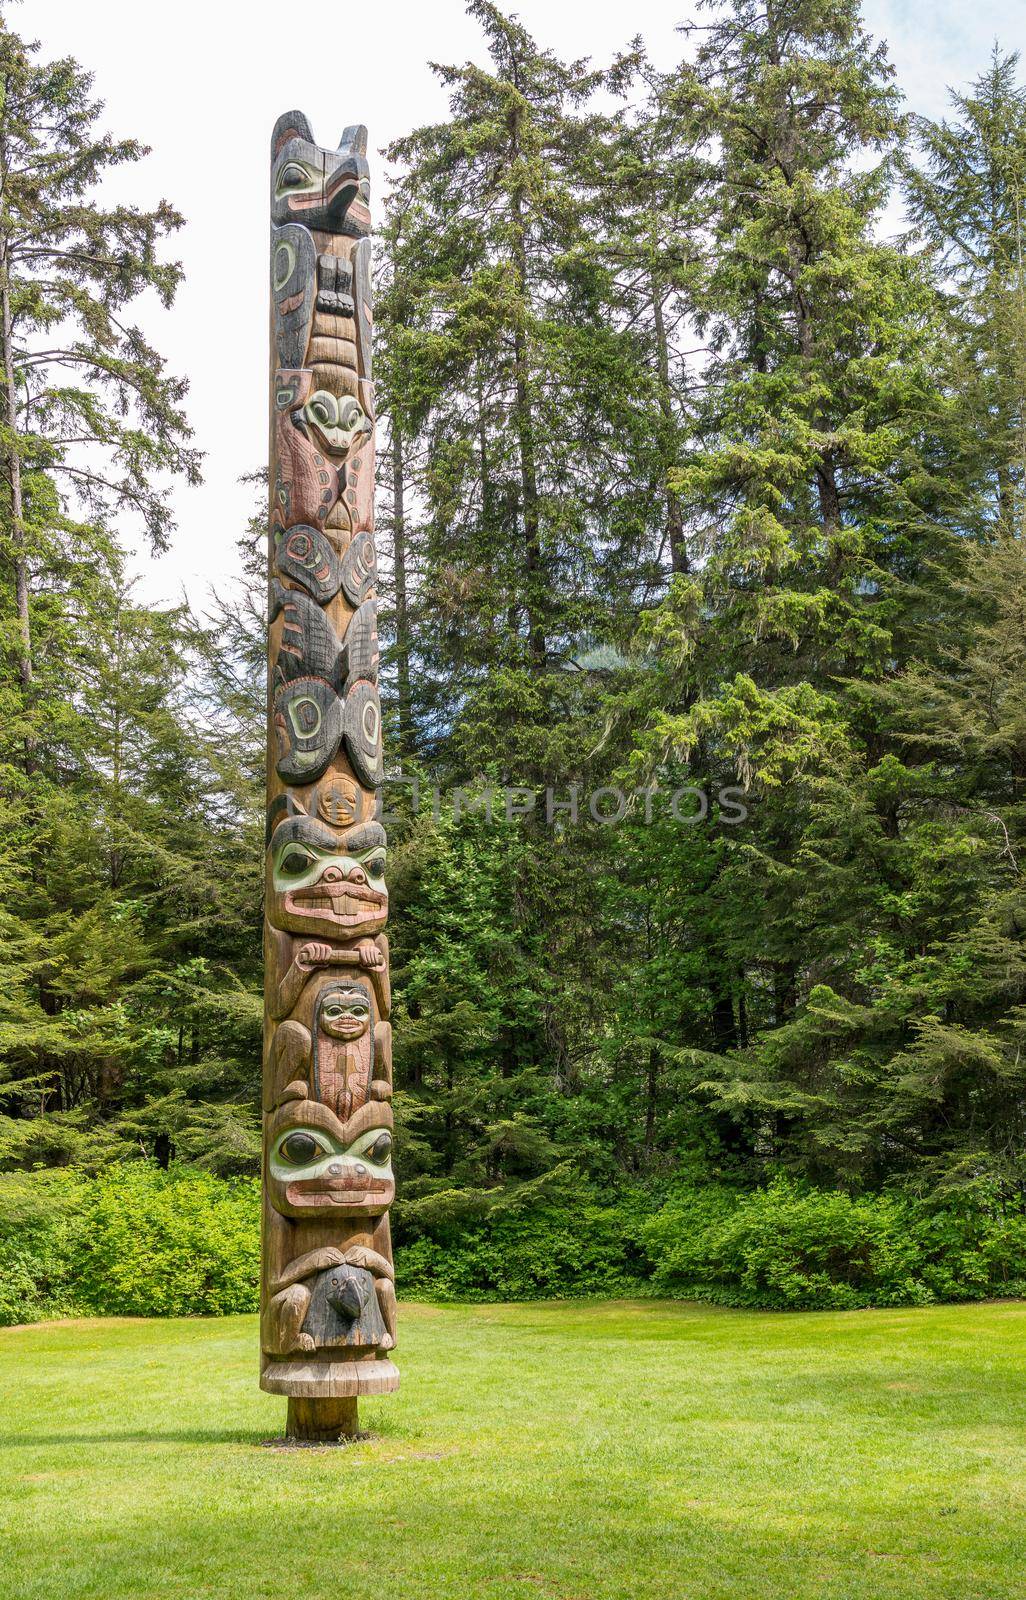 Detail of carved totem pole in the Sitka National Historical Park in Alaska by steheap